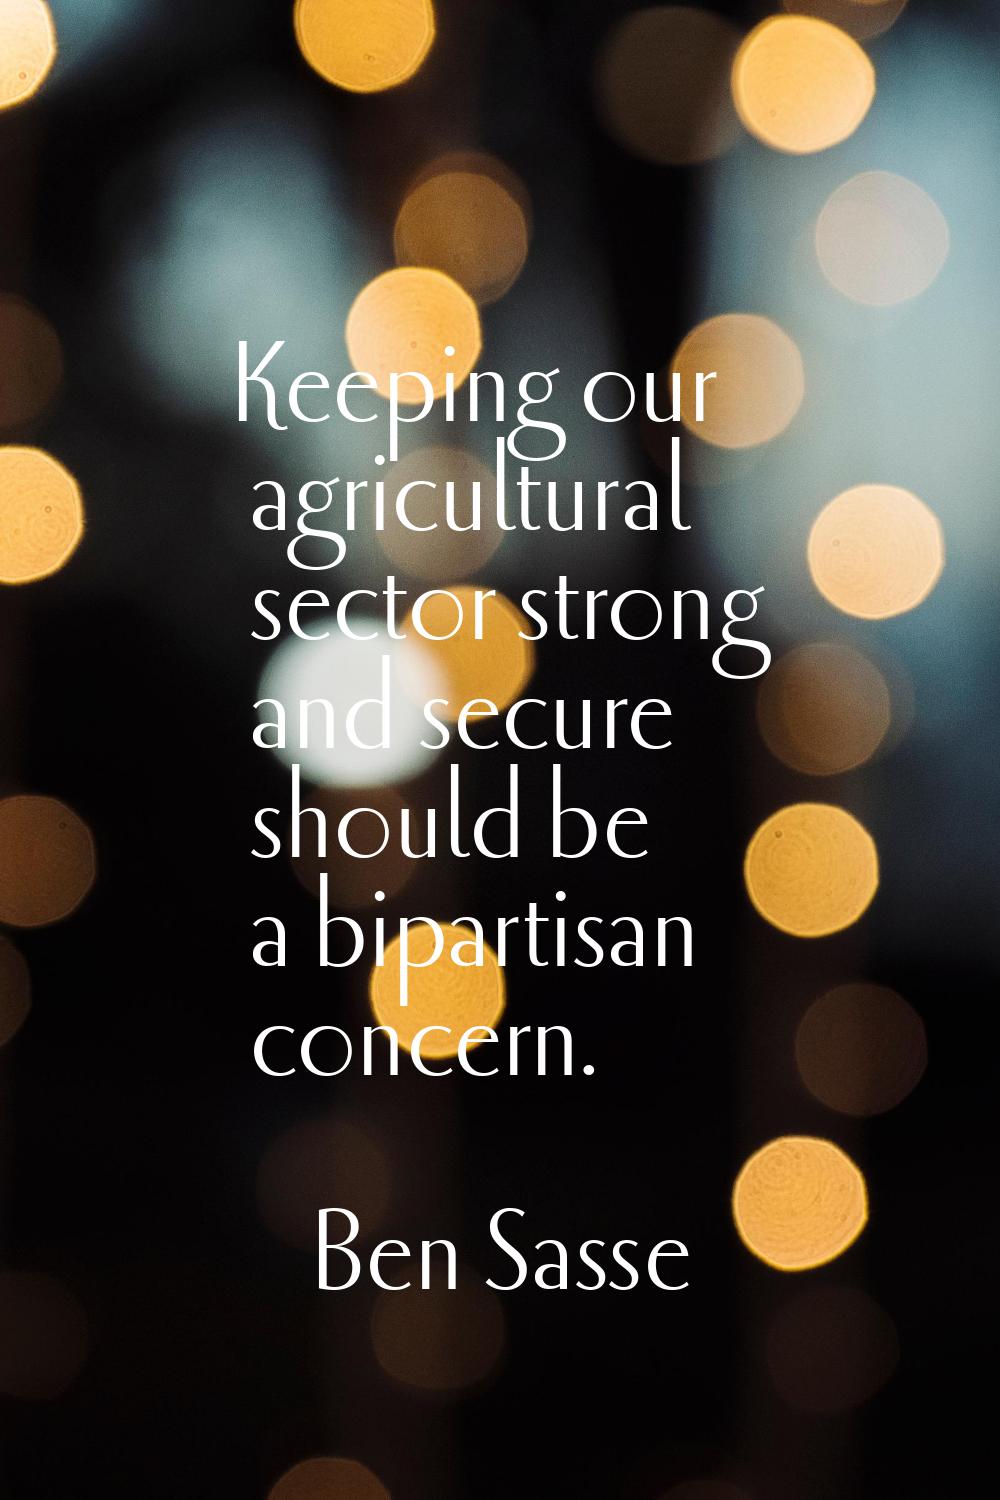 Keeping our agricultural sector strong and secure should be a bipartisan concern.